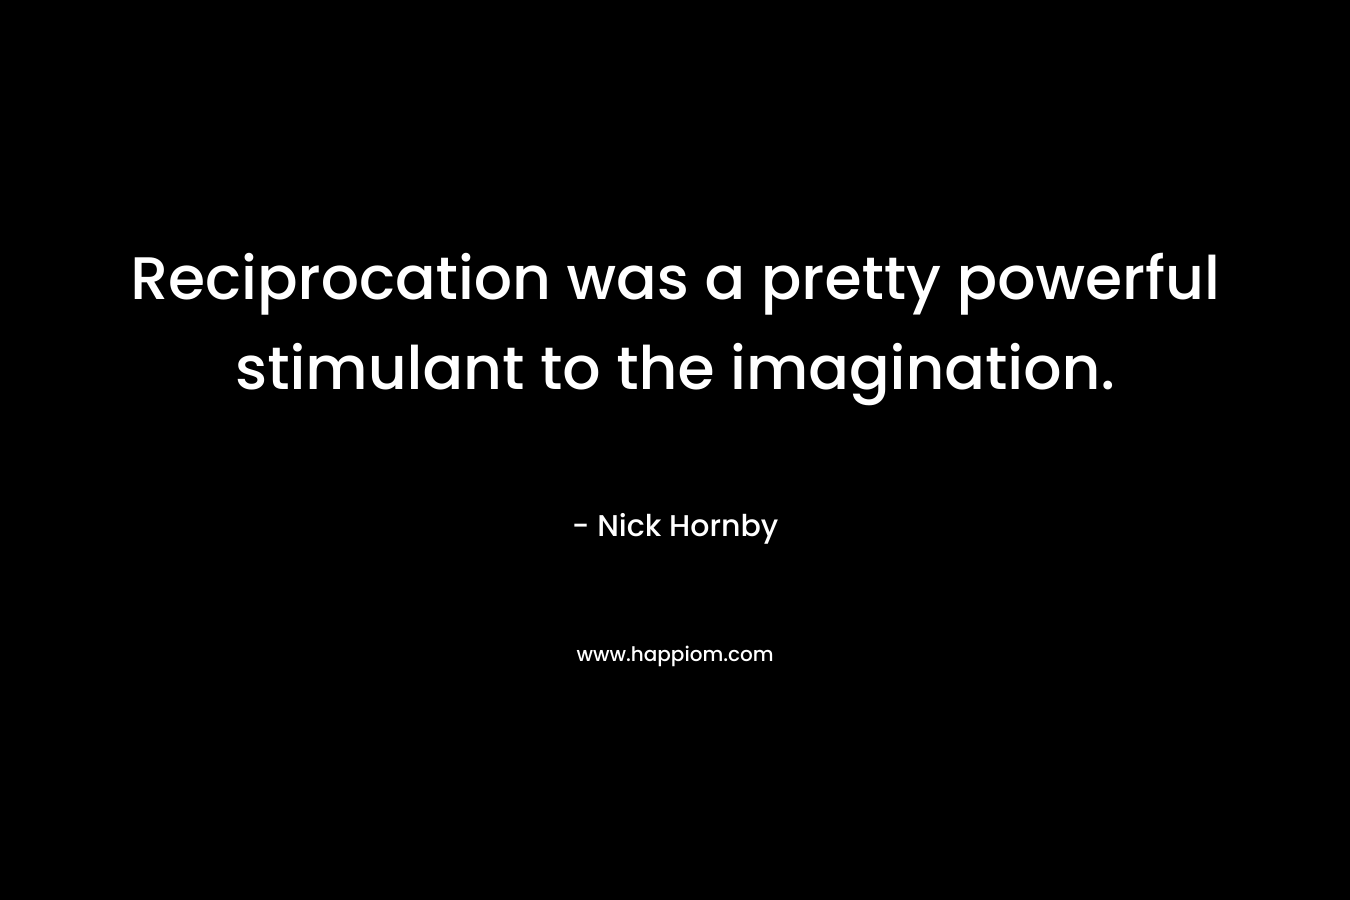 Reciprocation was a pretty powerful stimulant to the imagination.